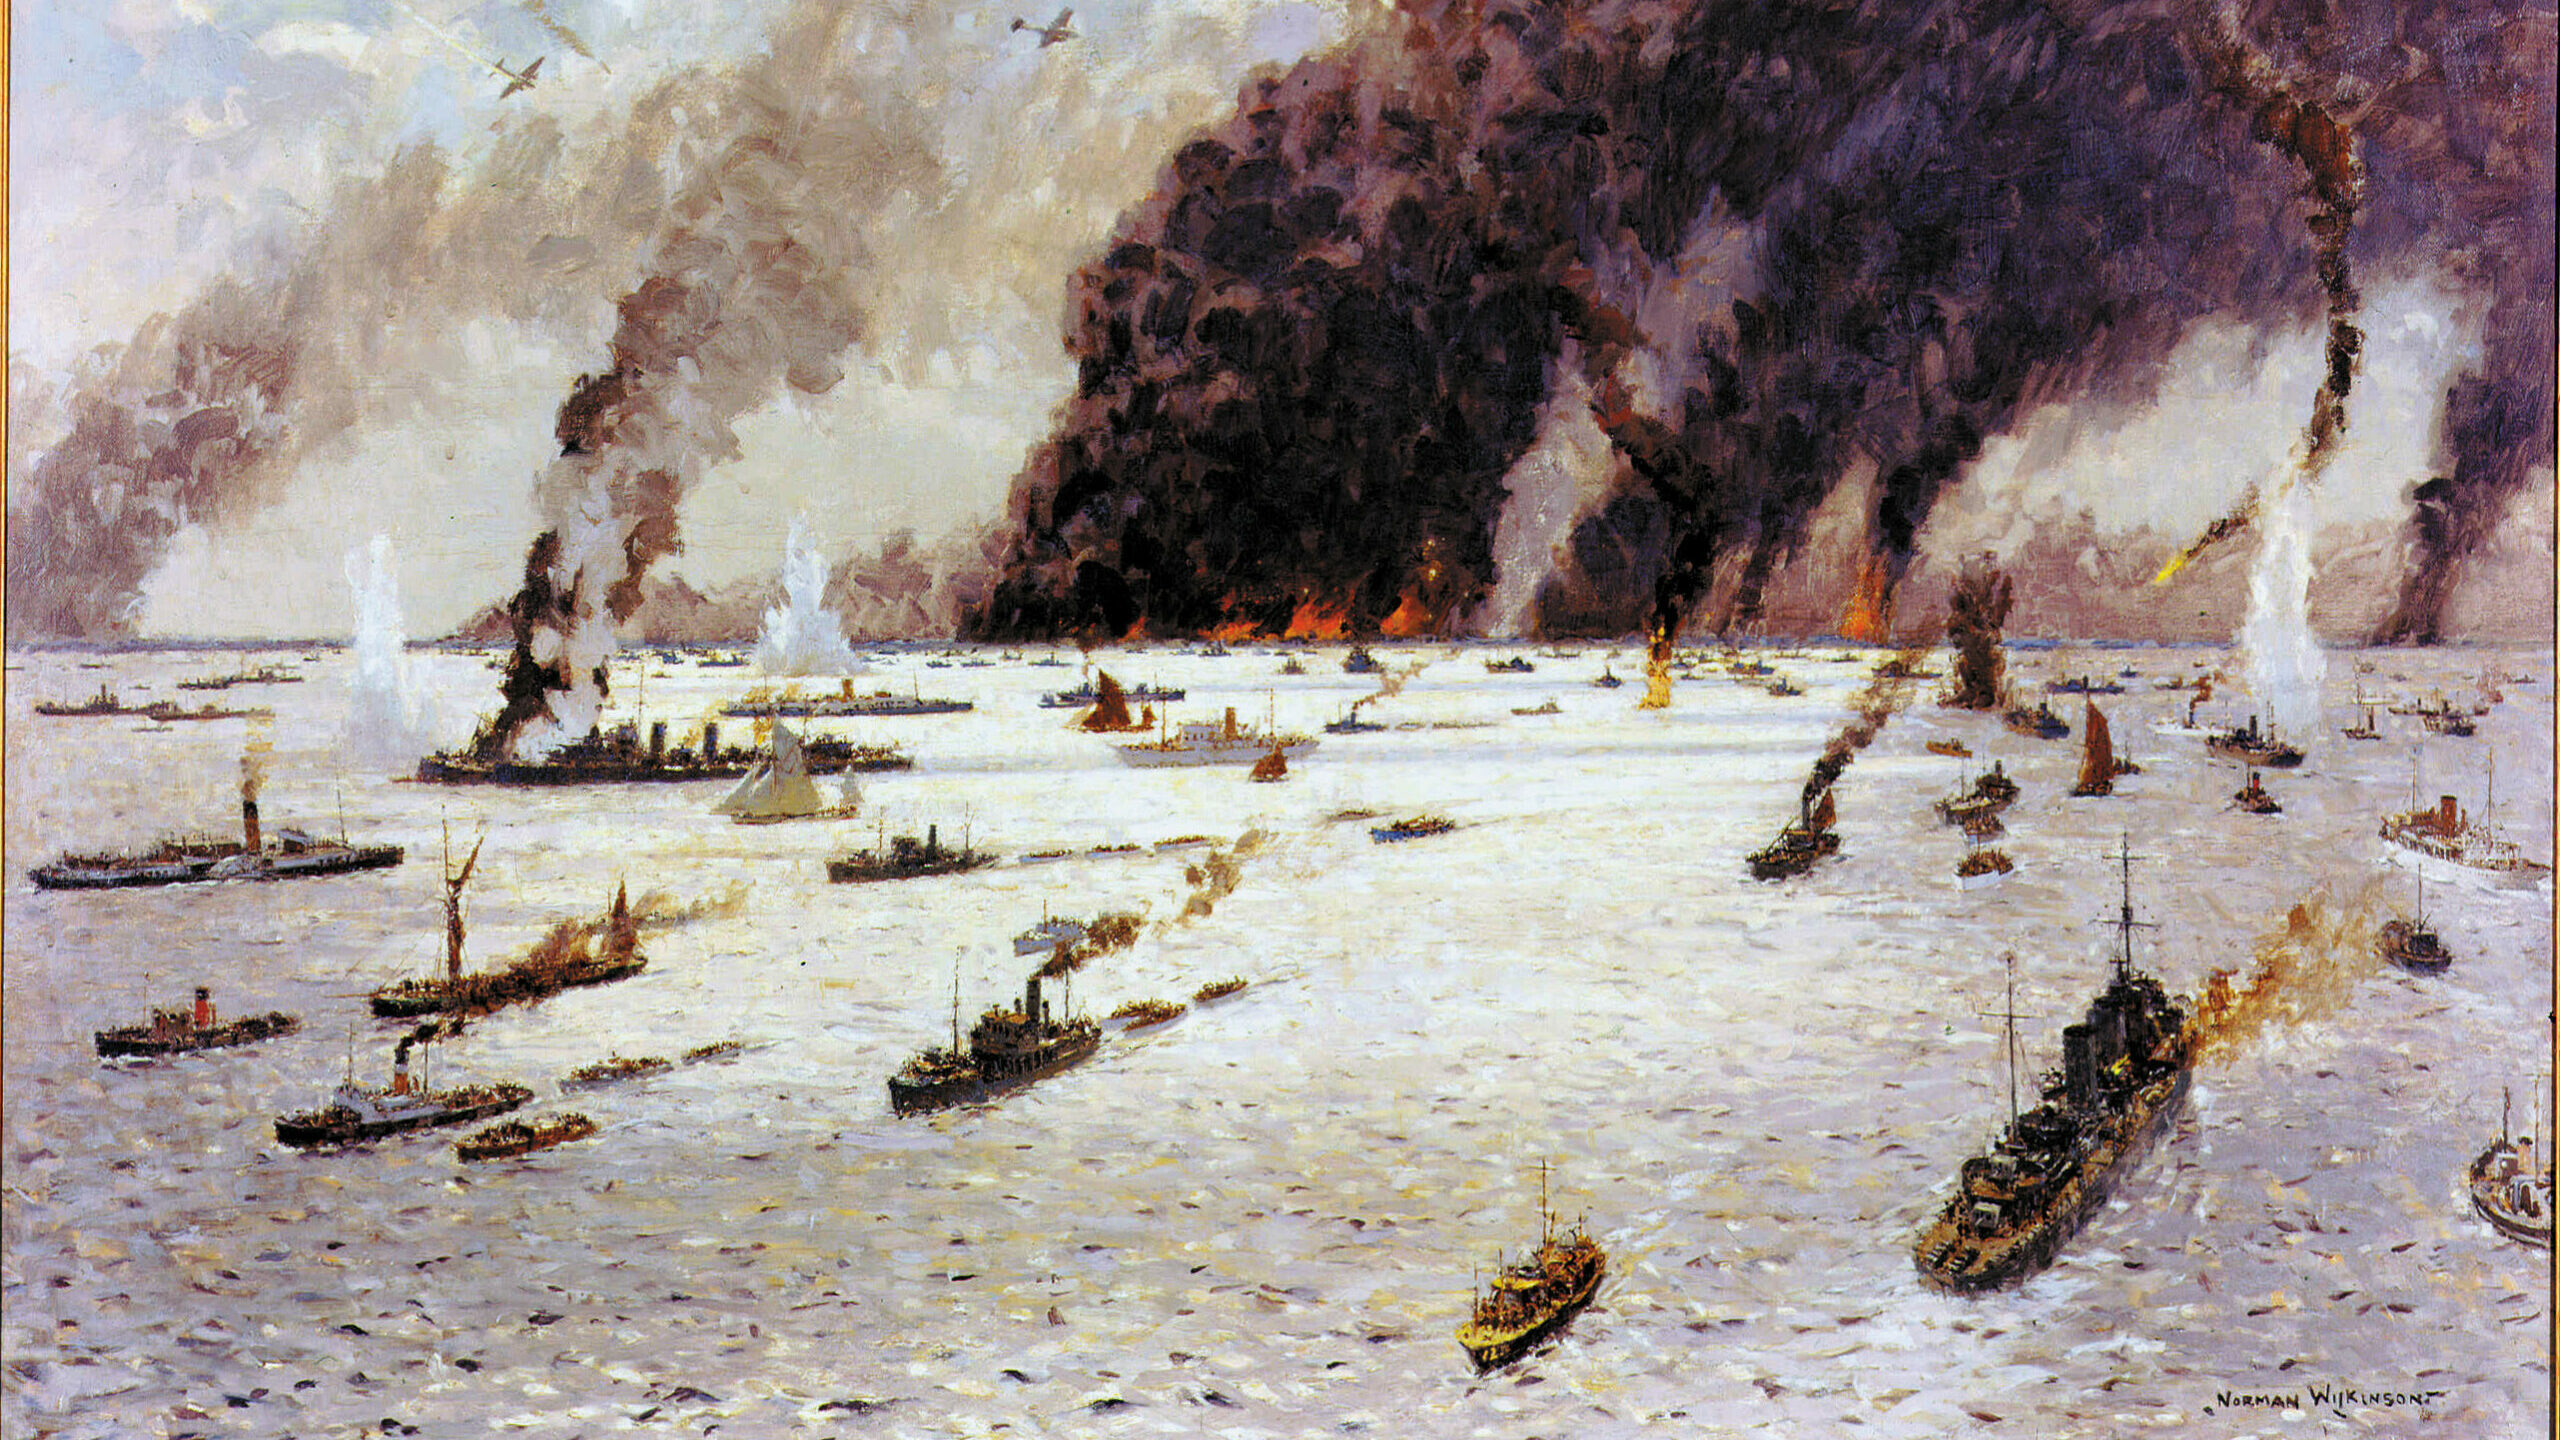 In this painting by Norman Wilkinson, the land, sea, and air around the port city of Dunkirk appear to be ablaze, beneath a pall of smoke. The epic evacuation of the British Expeditionary Force from the continent of Europe in June 1940 allowed thousands of Allied soldiers to fight another day.